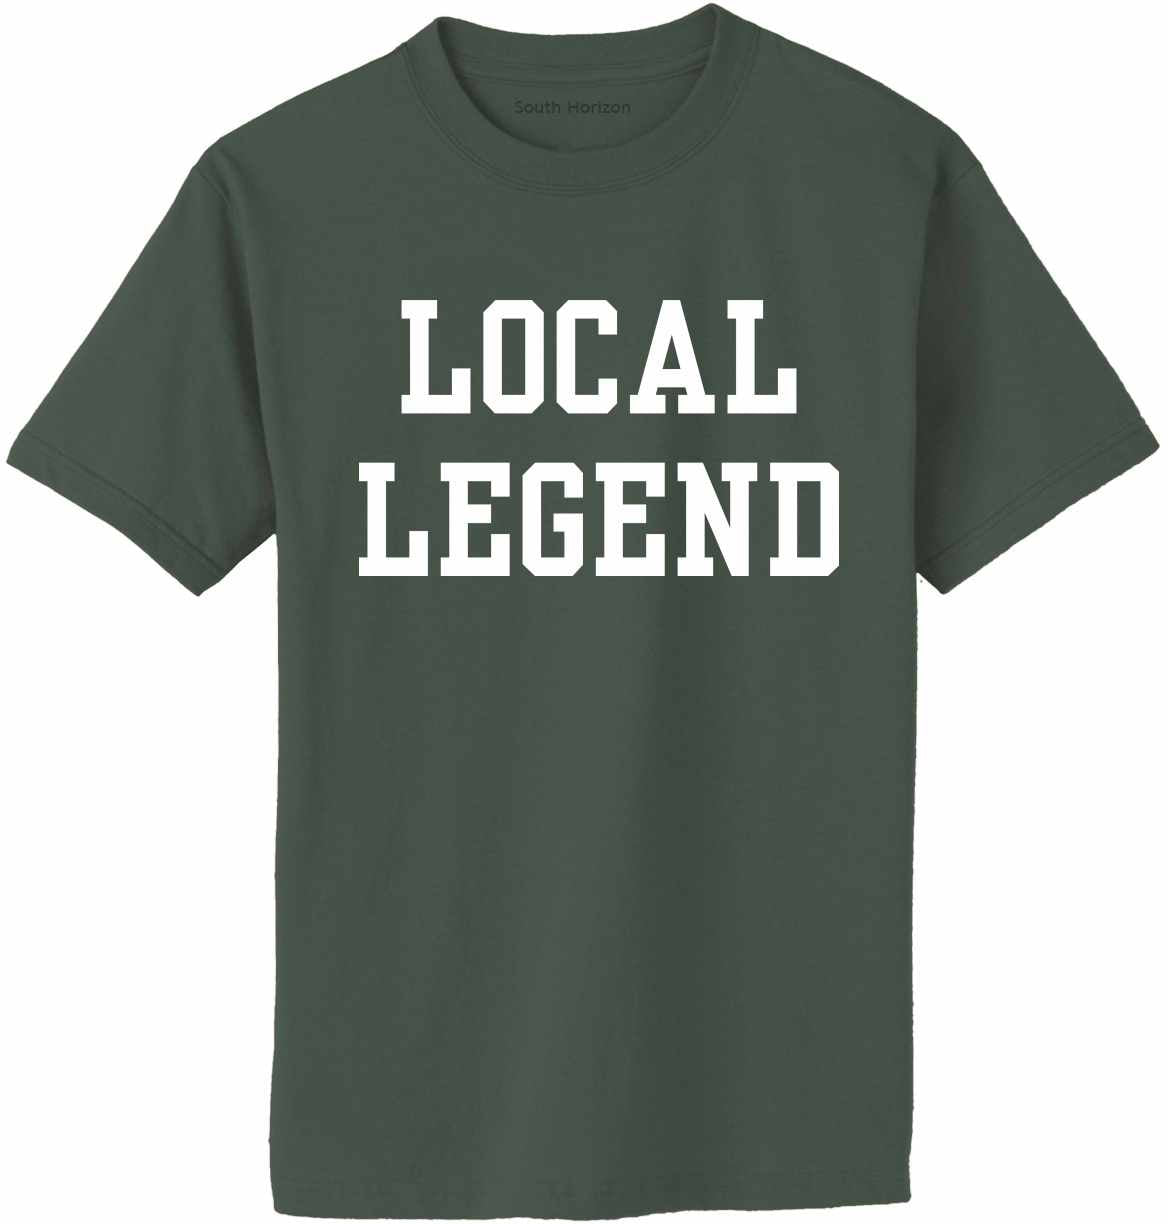 Local Legend on Adult T-Shirt